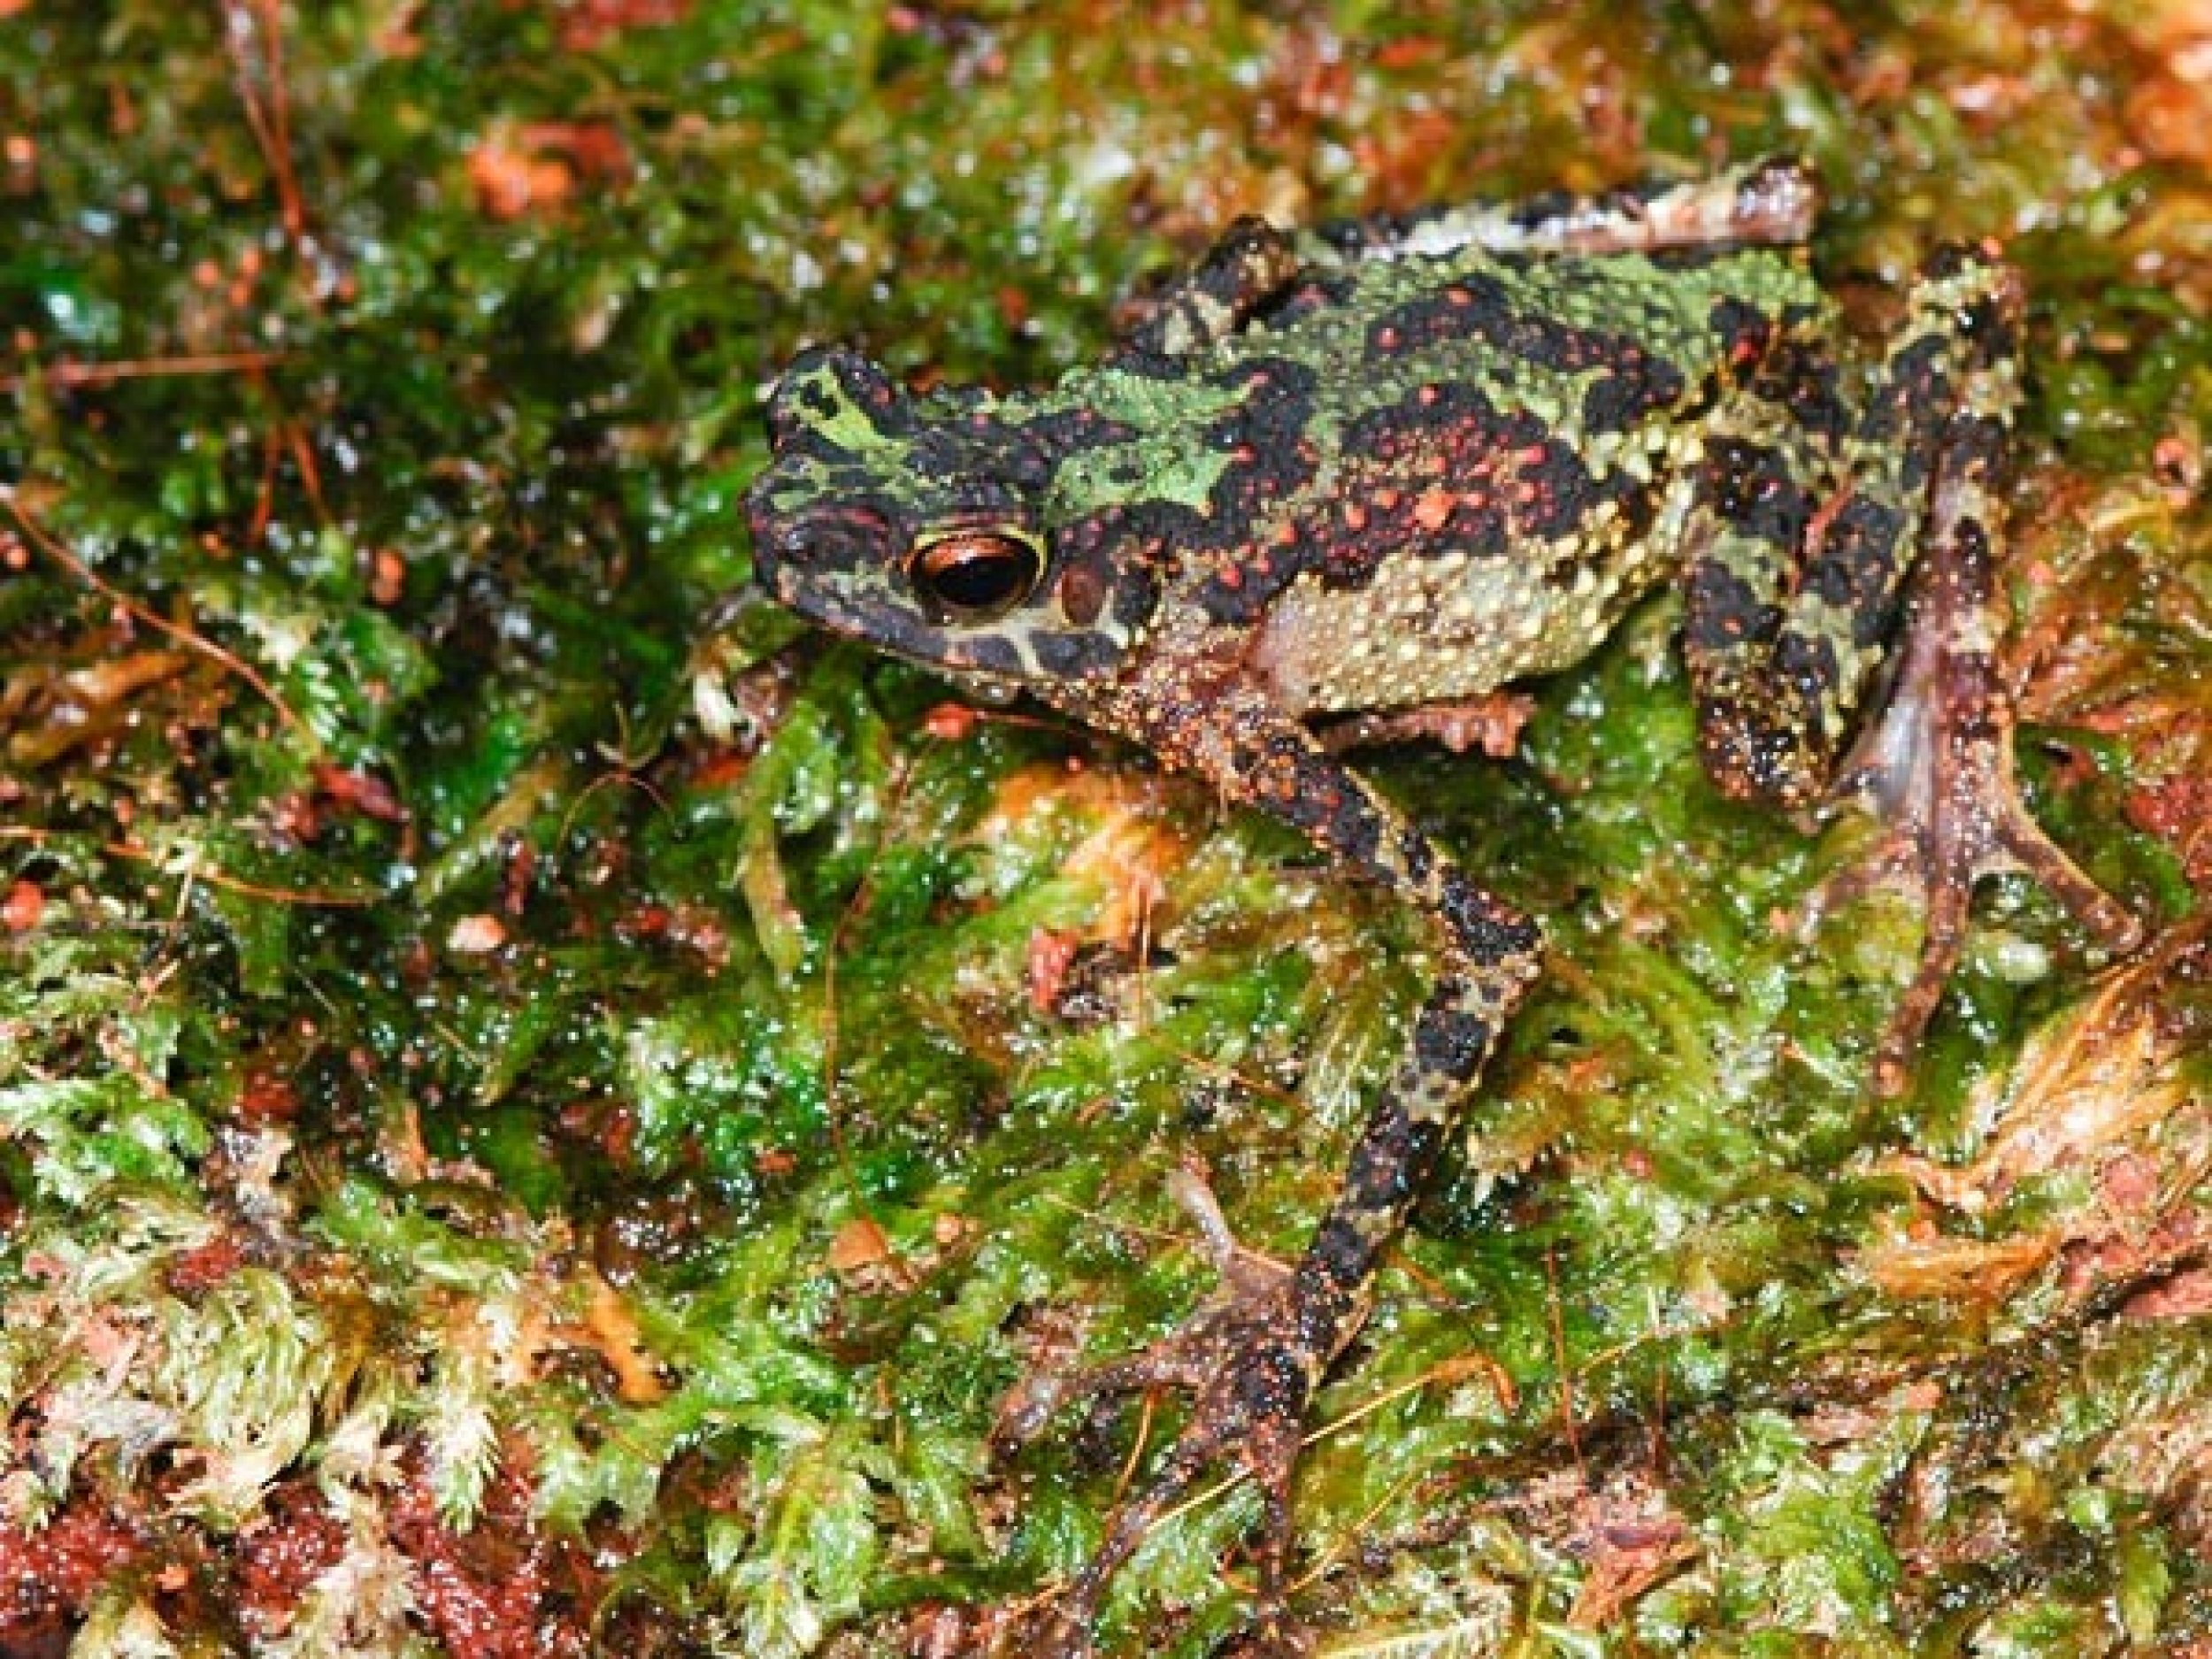 Rainbow Toad Photographed - Conservation International